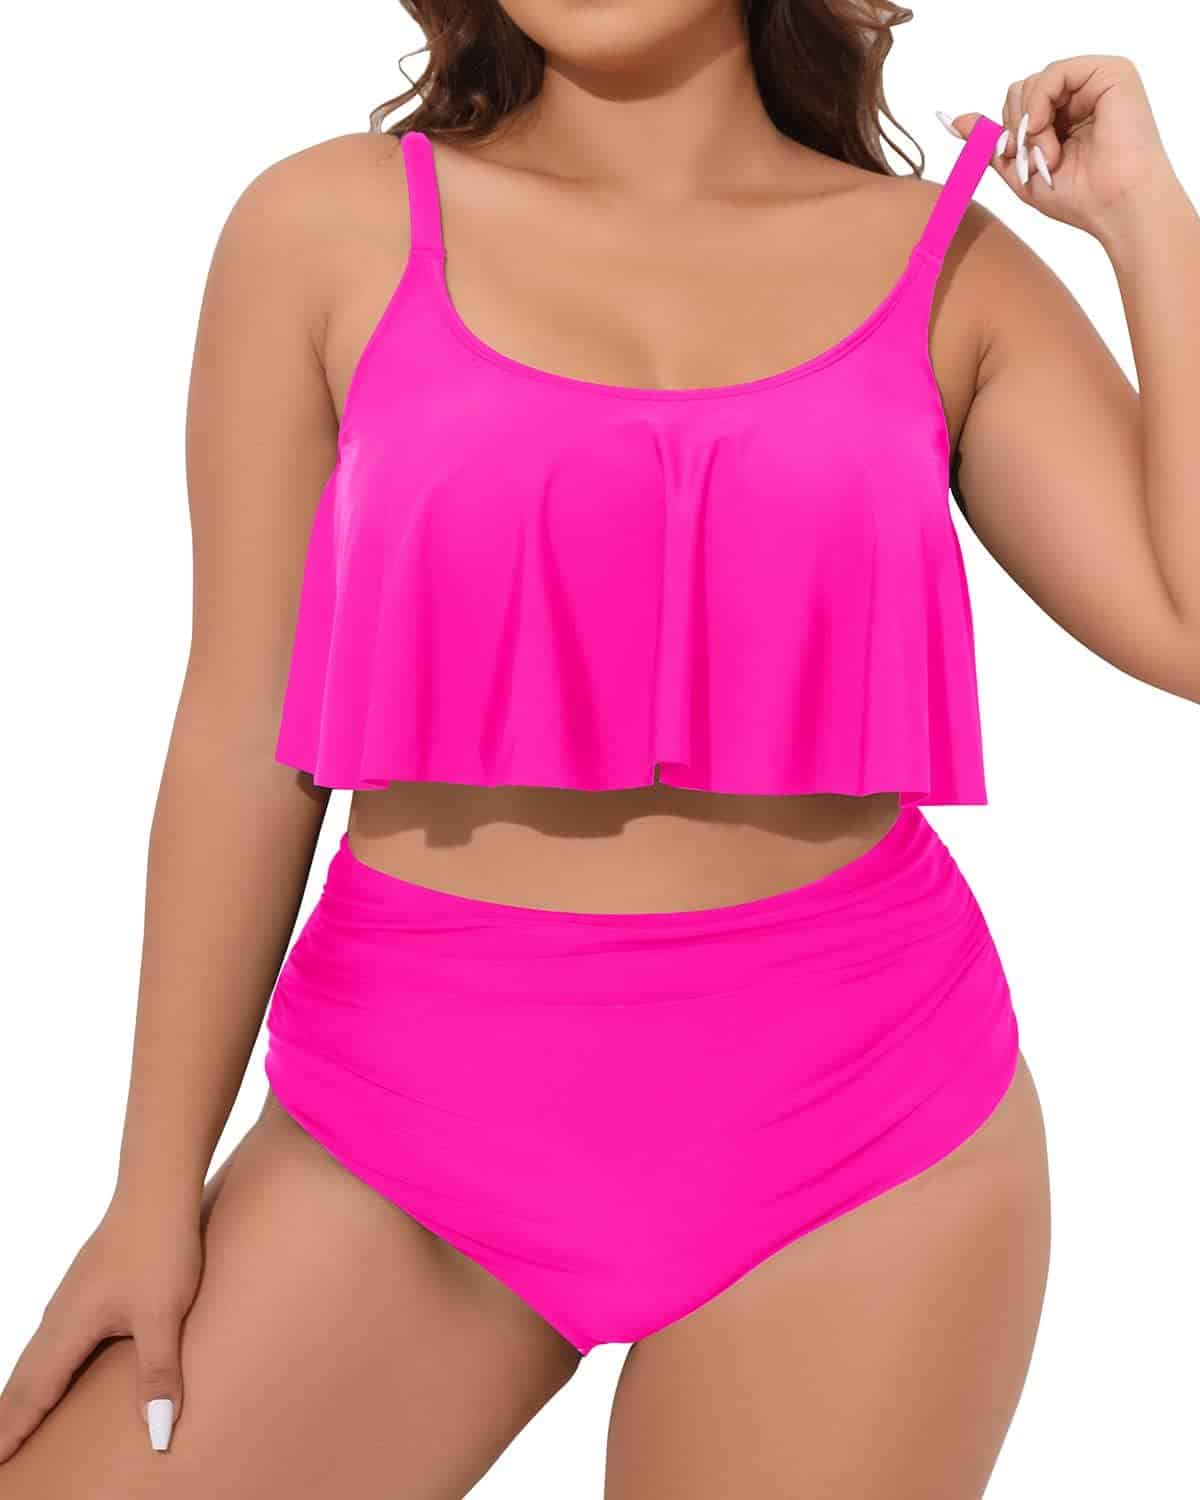 Aqua Eve Women Plus Size Two Piece Swimsuits: The Perfect Tummy Control Bathing Suits